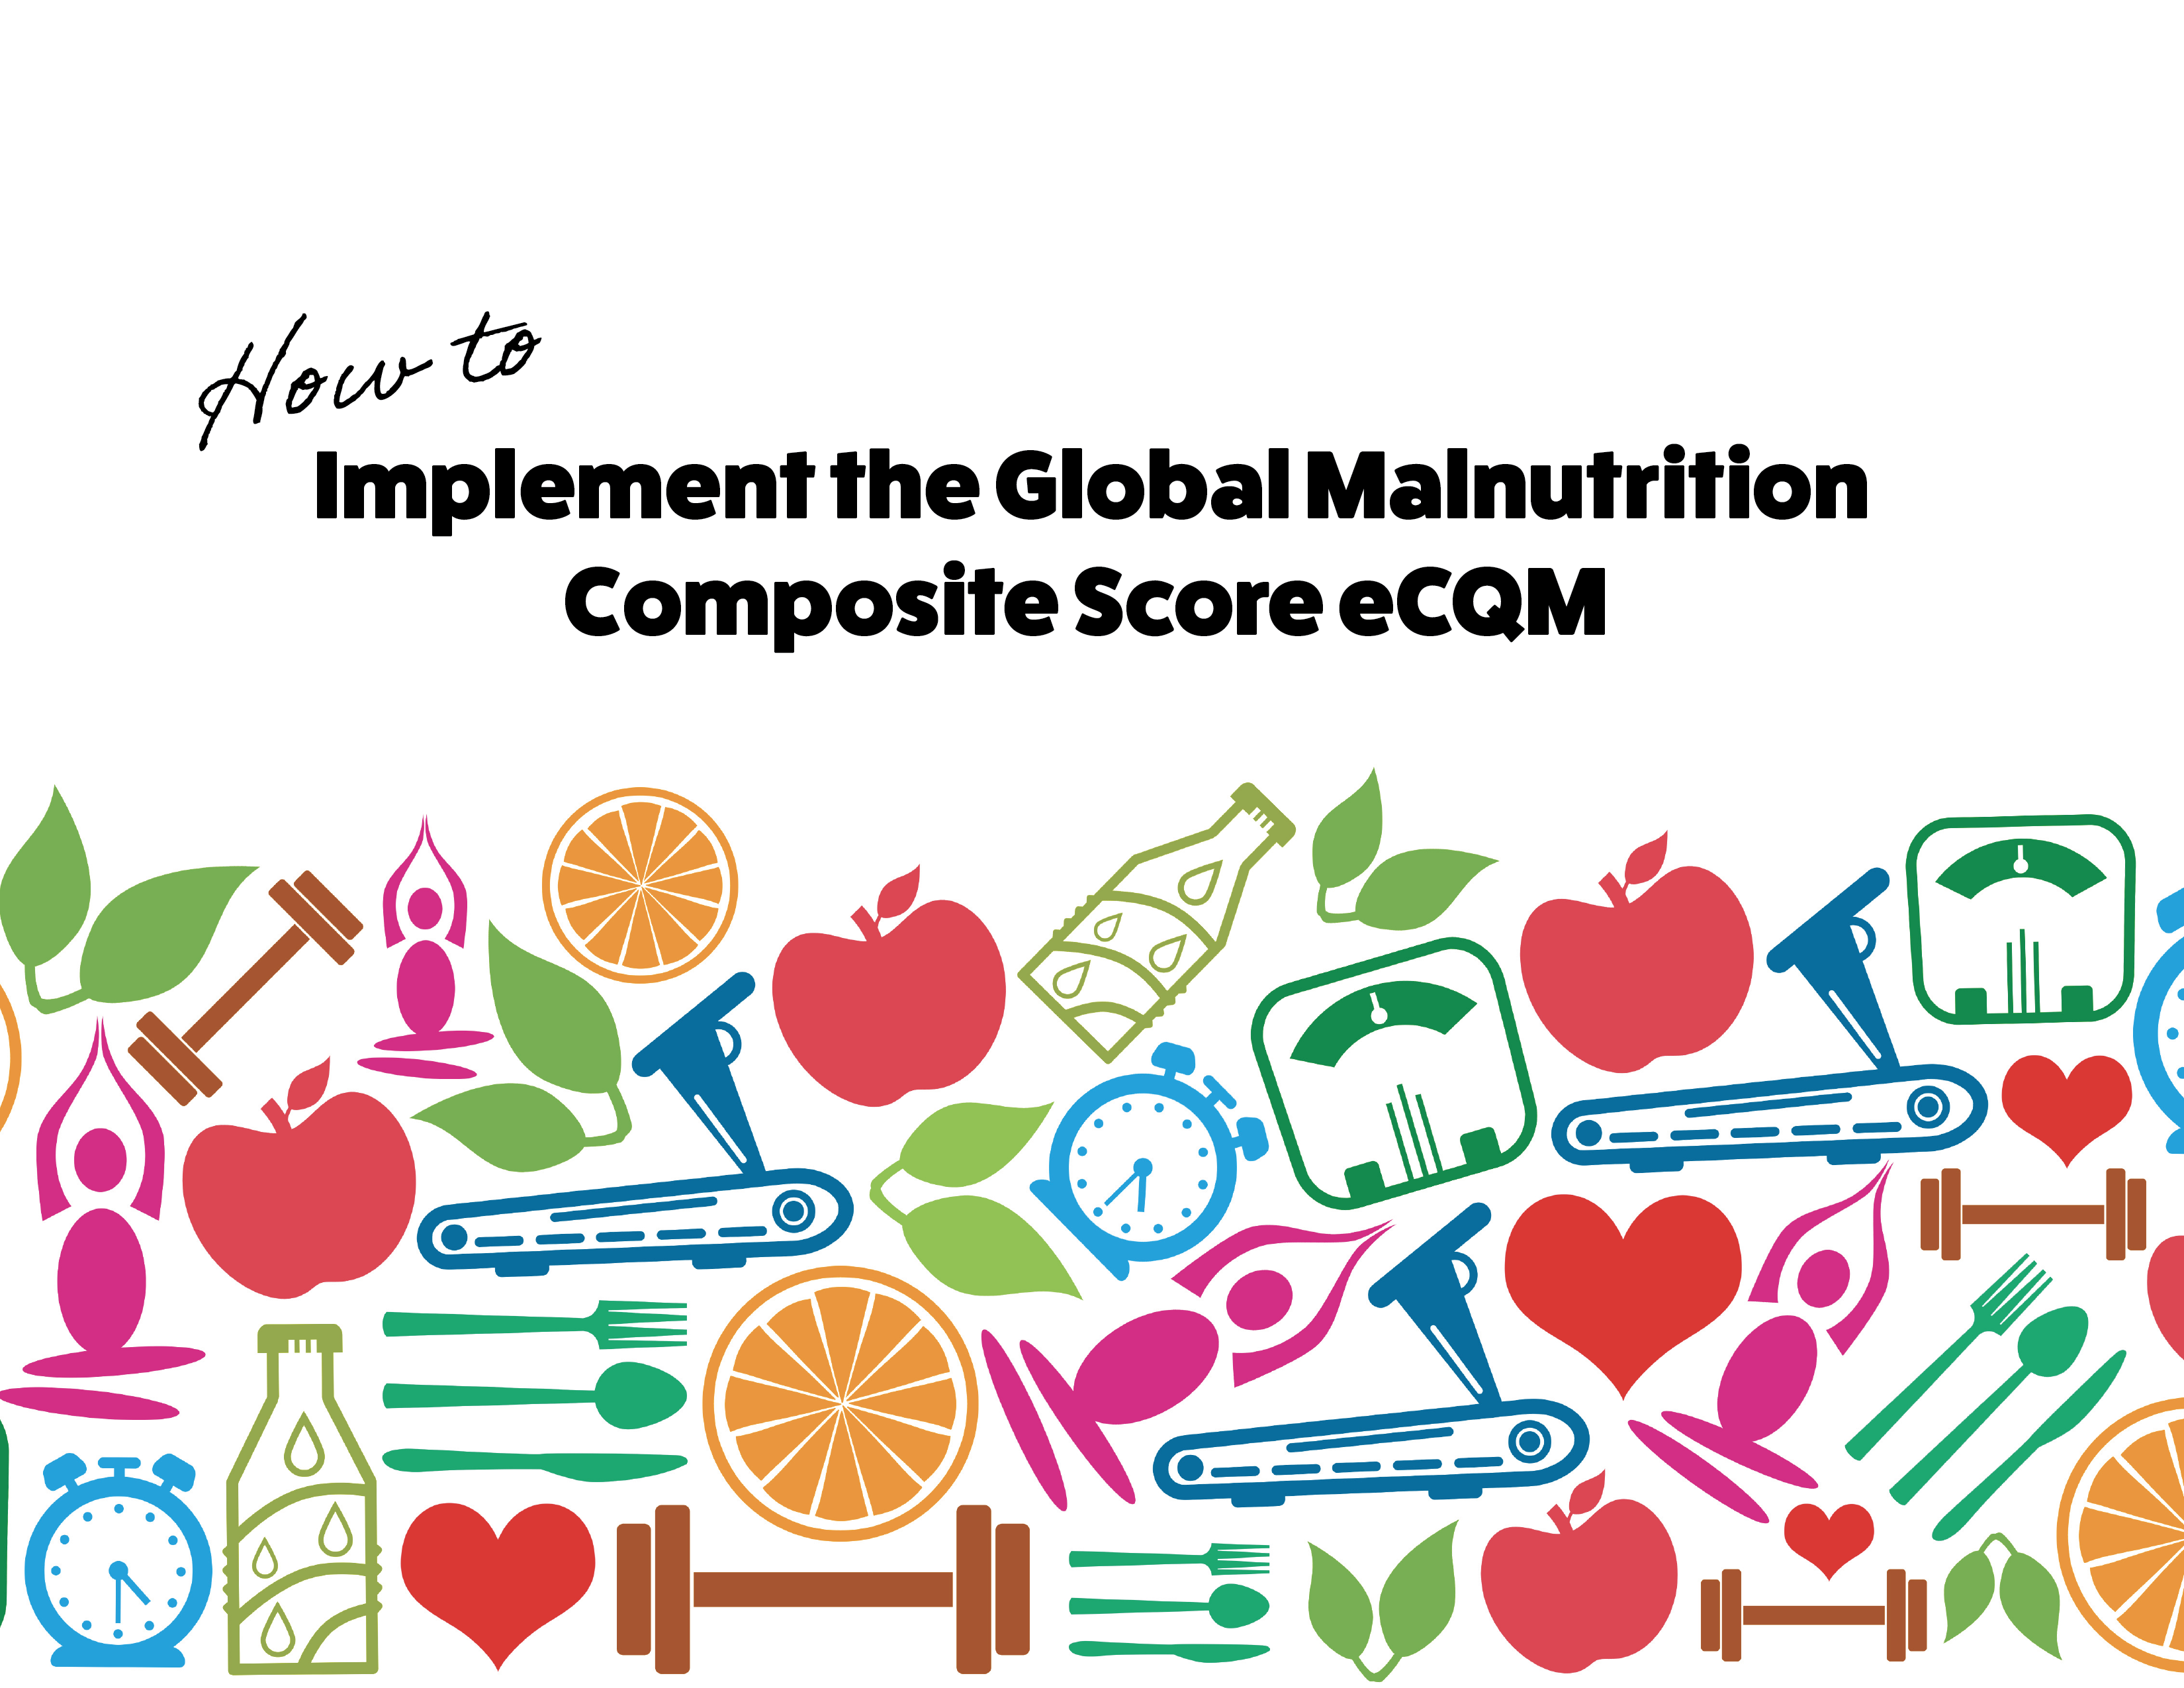 How to Implement the Global Malnutrition Composite Score eCQM